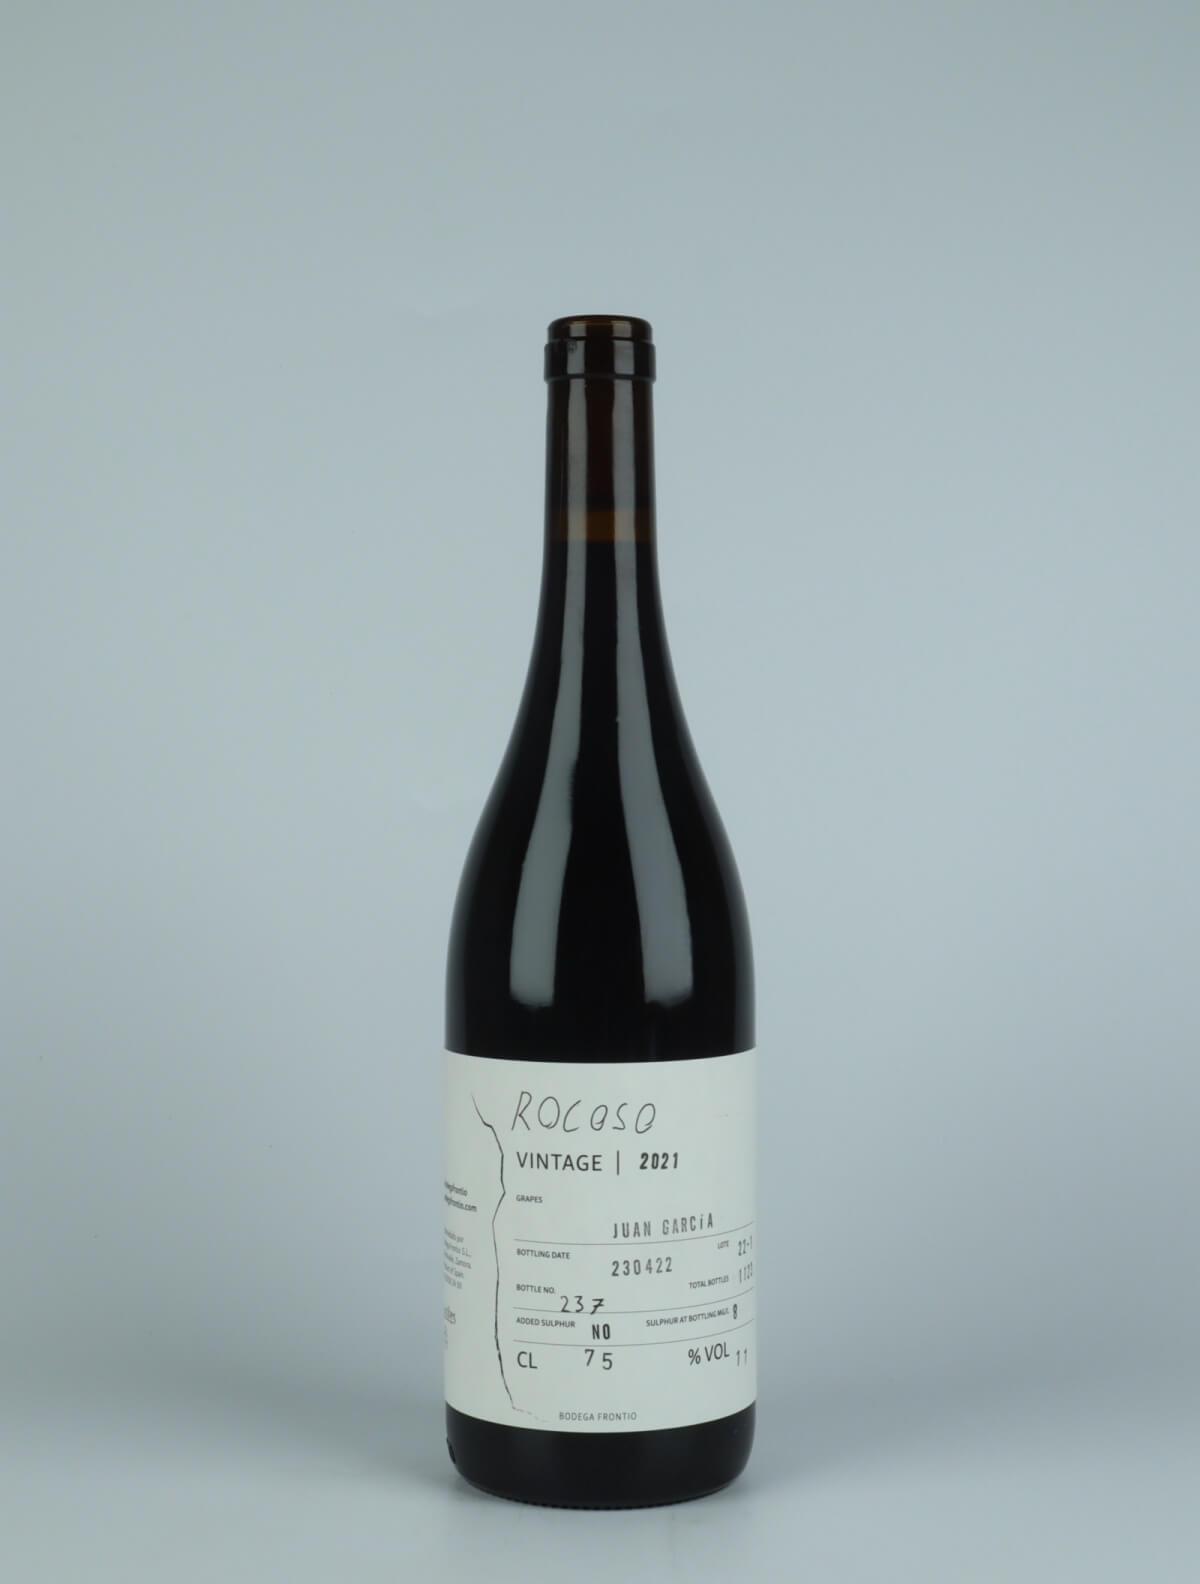 A bottle 2021 Rocoso Red wine from Bodega Frontio, Arribes in Spain